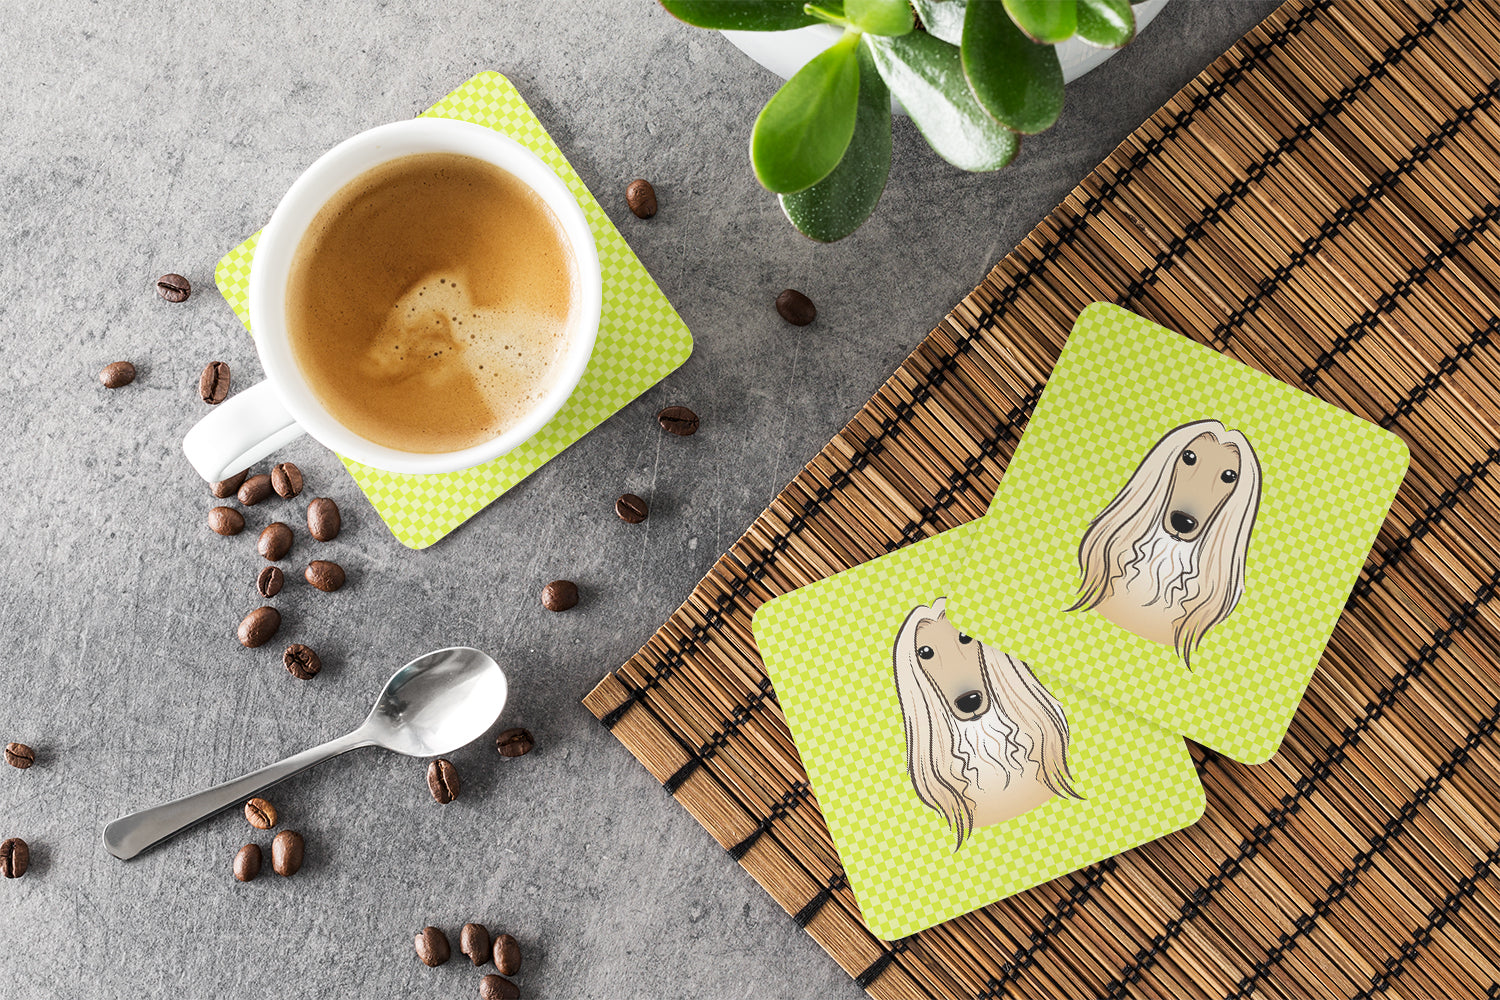 Set of 4 Checkerboard Lime Green Afghan Hound Foam Coasters BB1306FC - the-store.com